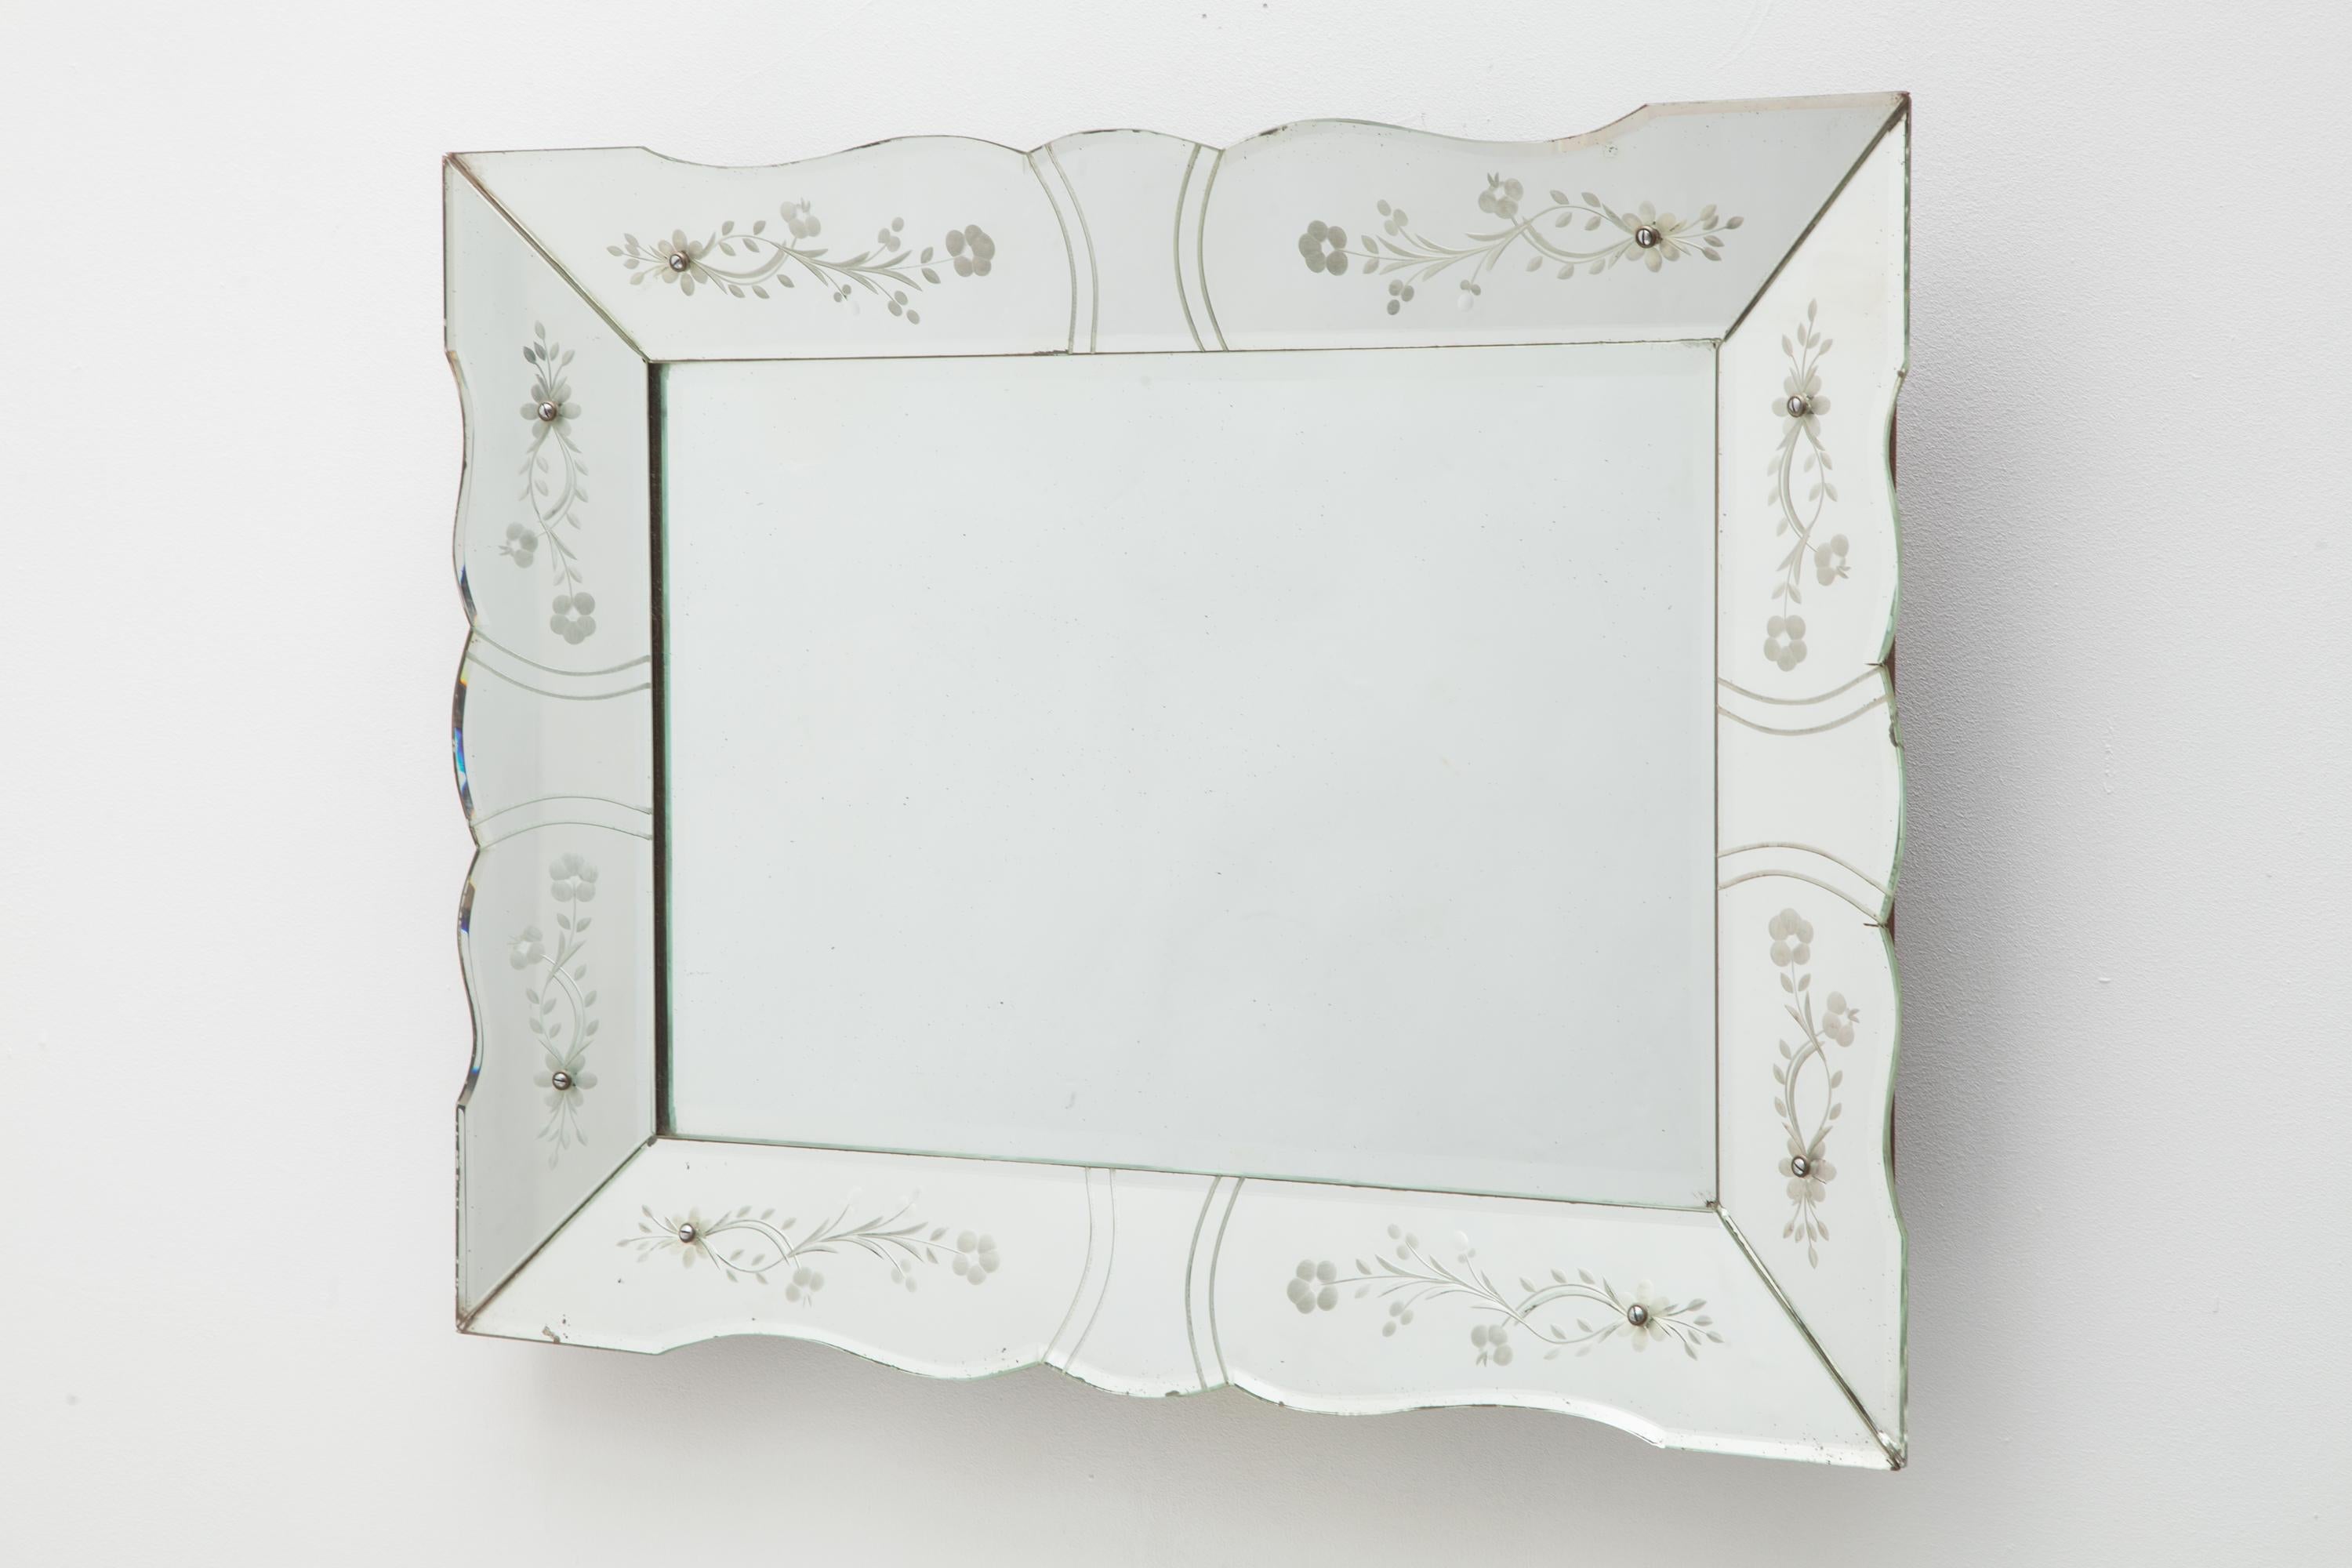 A beautiful Art Deco mirror with scrolled edge. Features a delicate etched floral motif. Horizontal rectangle shape. Backed by a wooden frame. France 1930s.